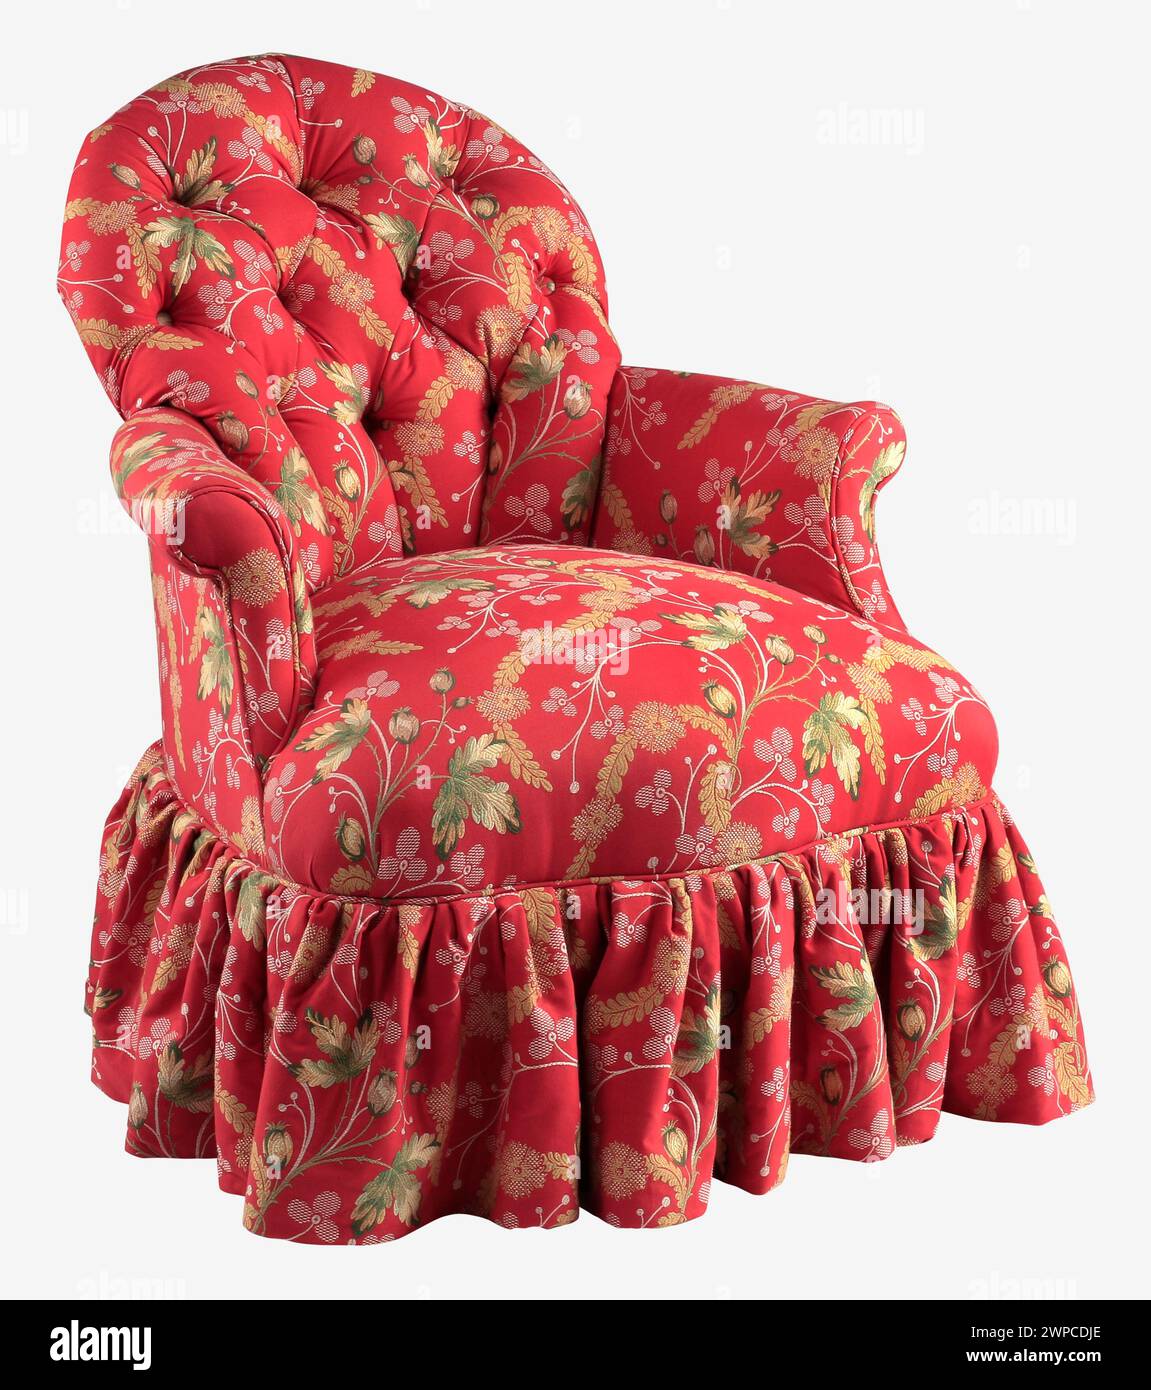 Upholstered arm chair red with skirt with clipping path. Stock Photo